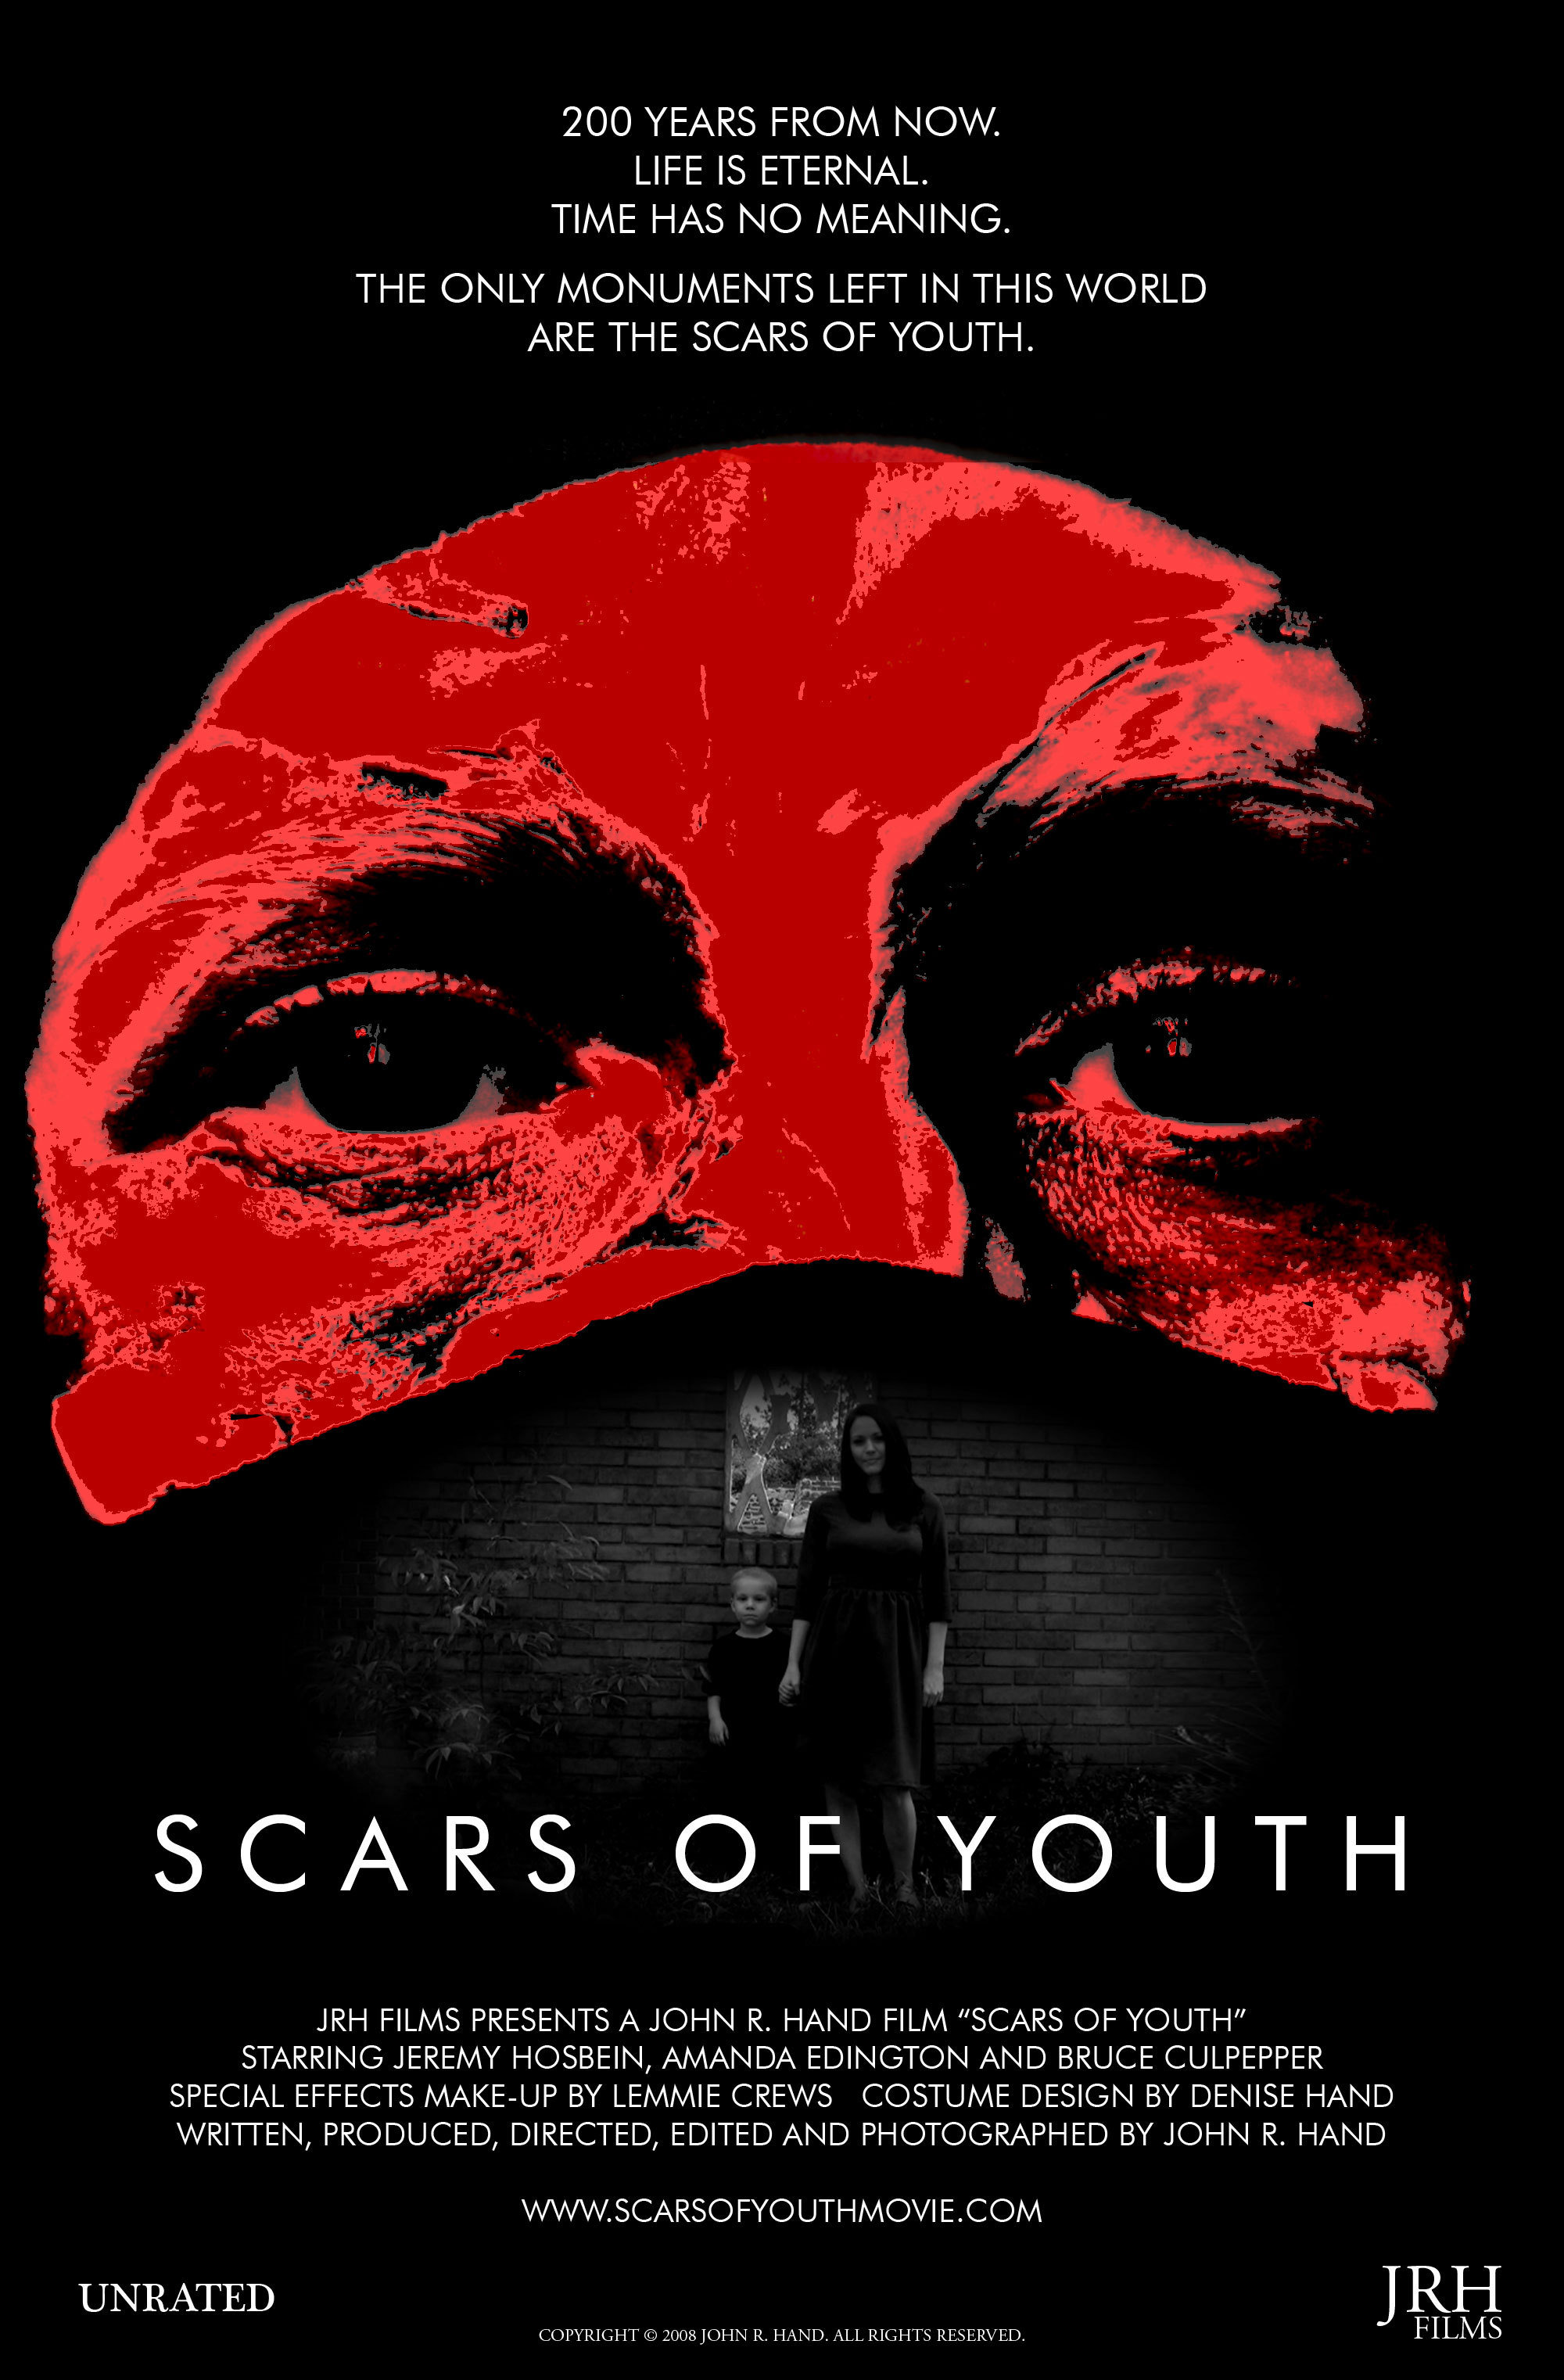 Scars of Youth (2008) Screenshot 5